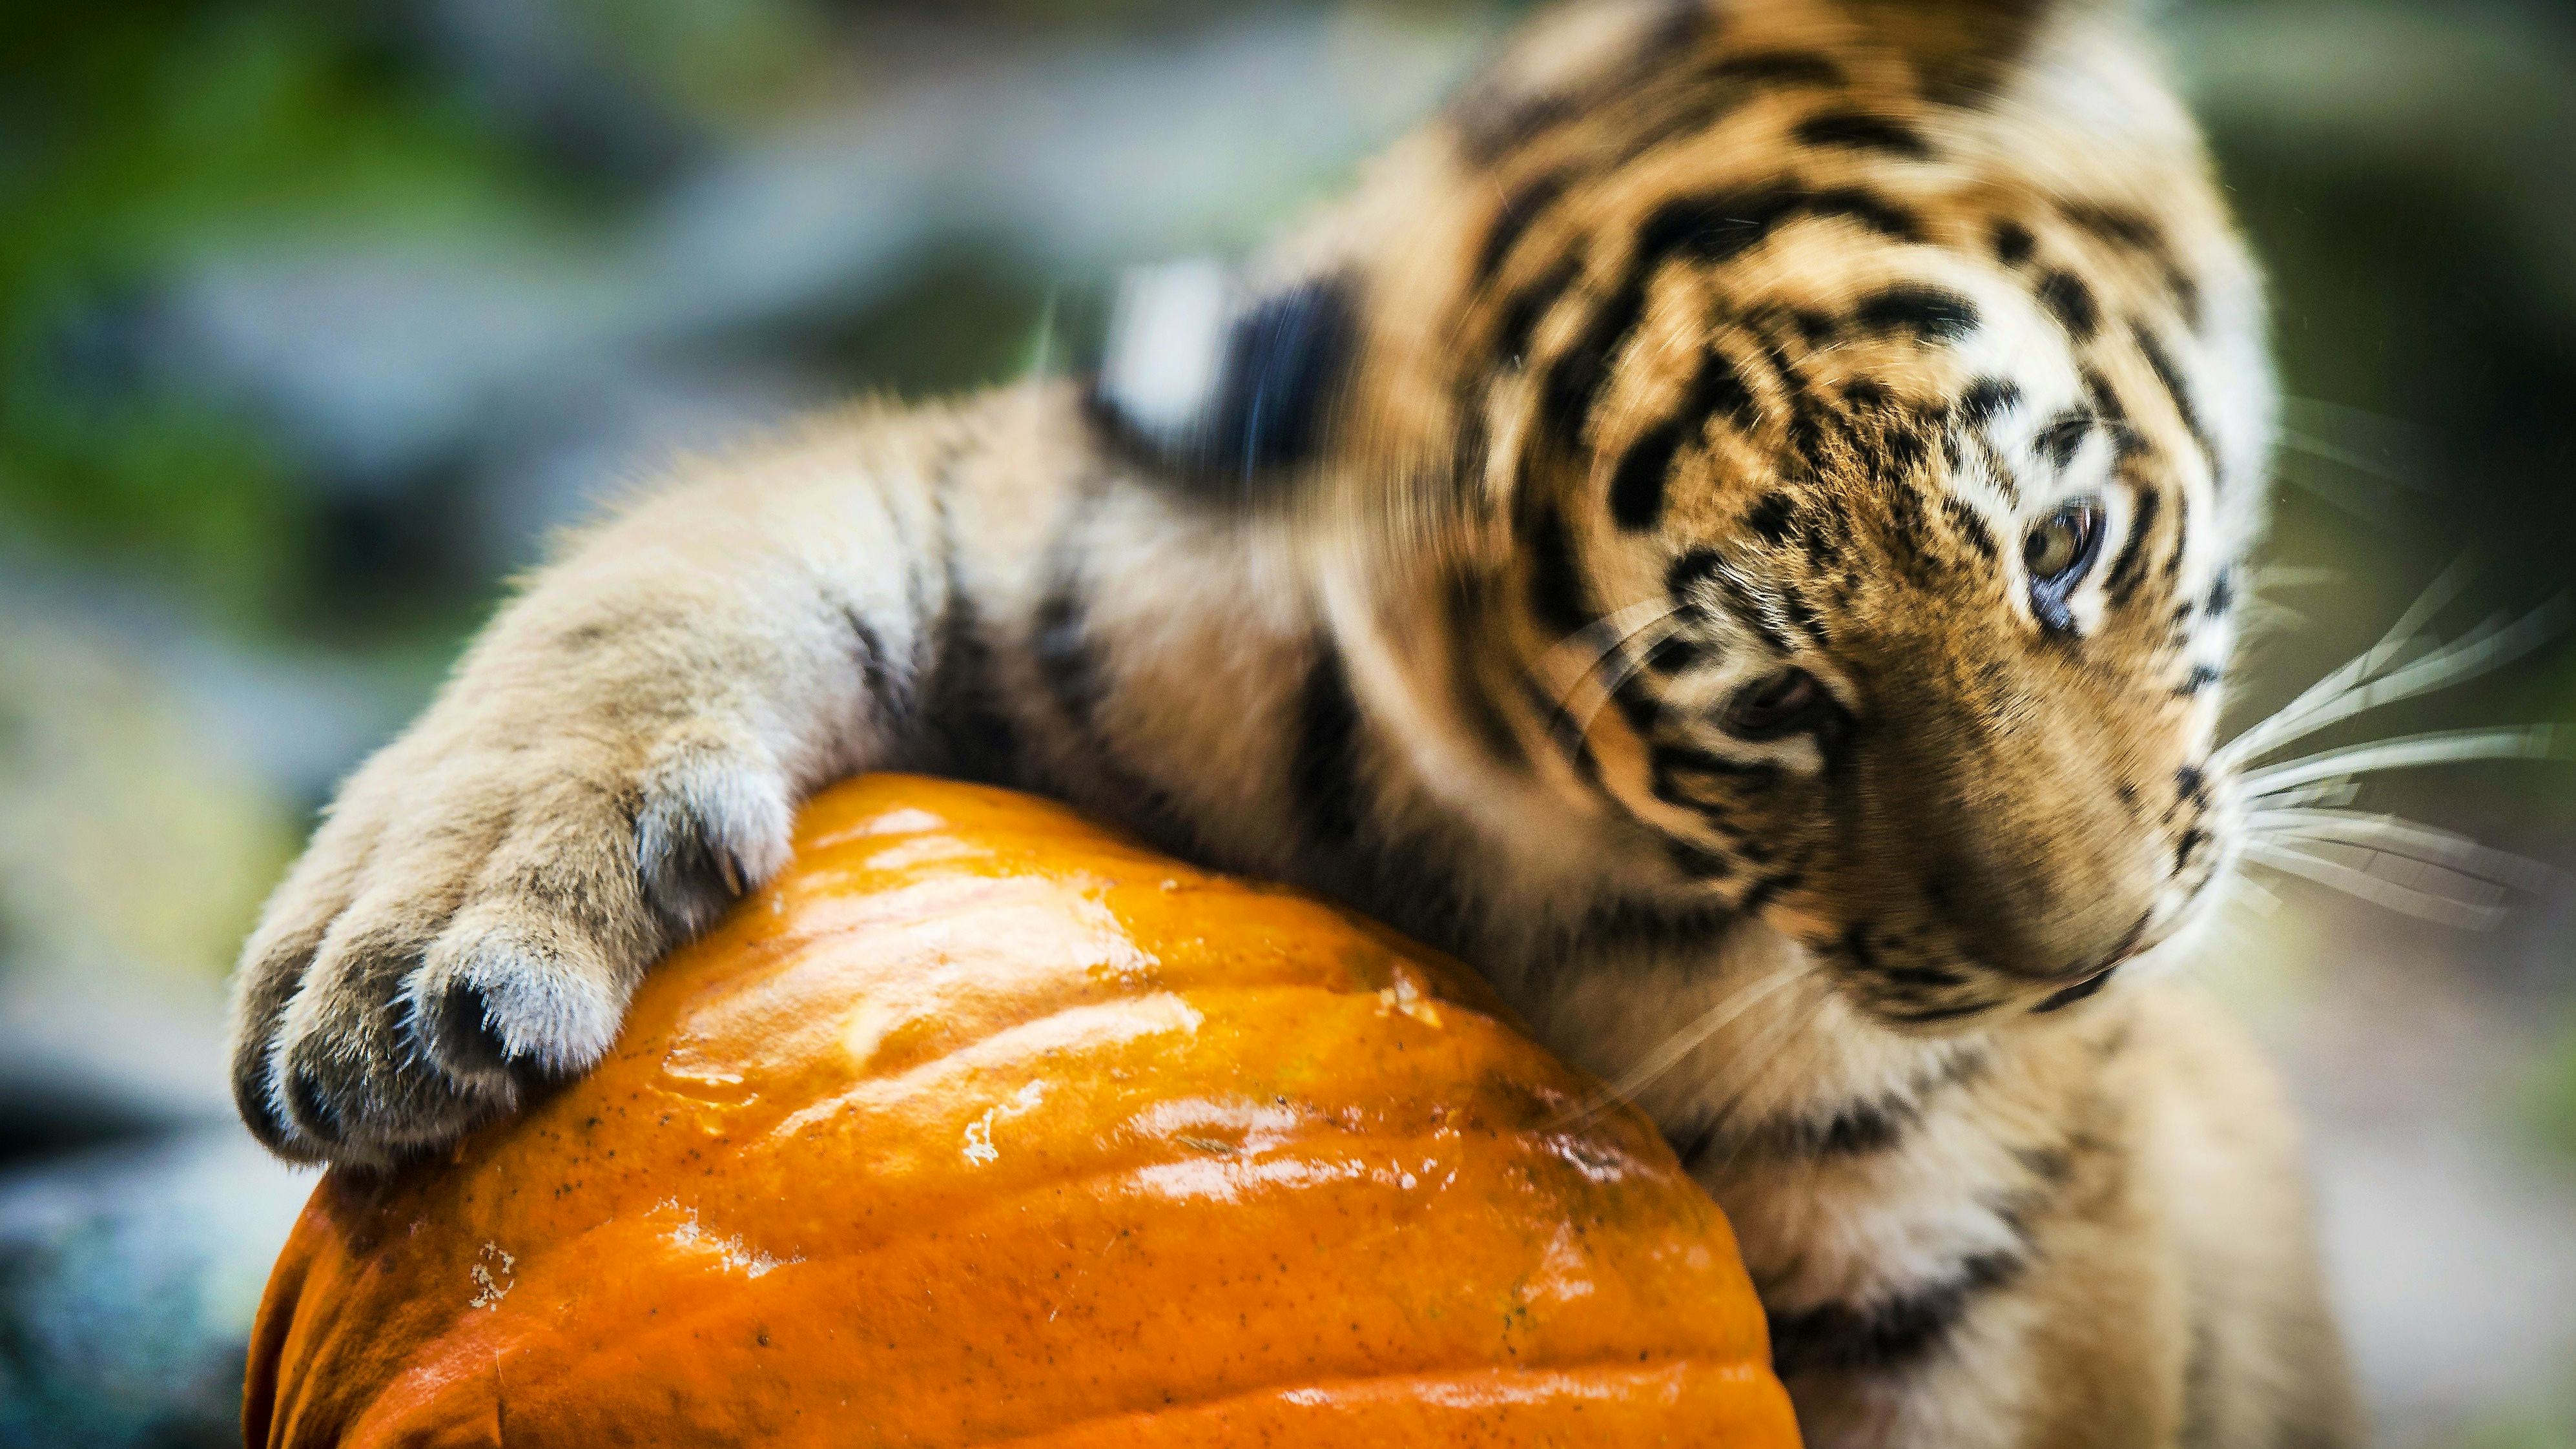 Newsela - Why do zoo animals get pumpkins? For play and public relations